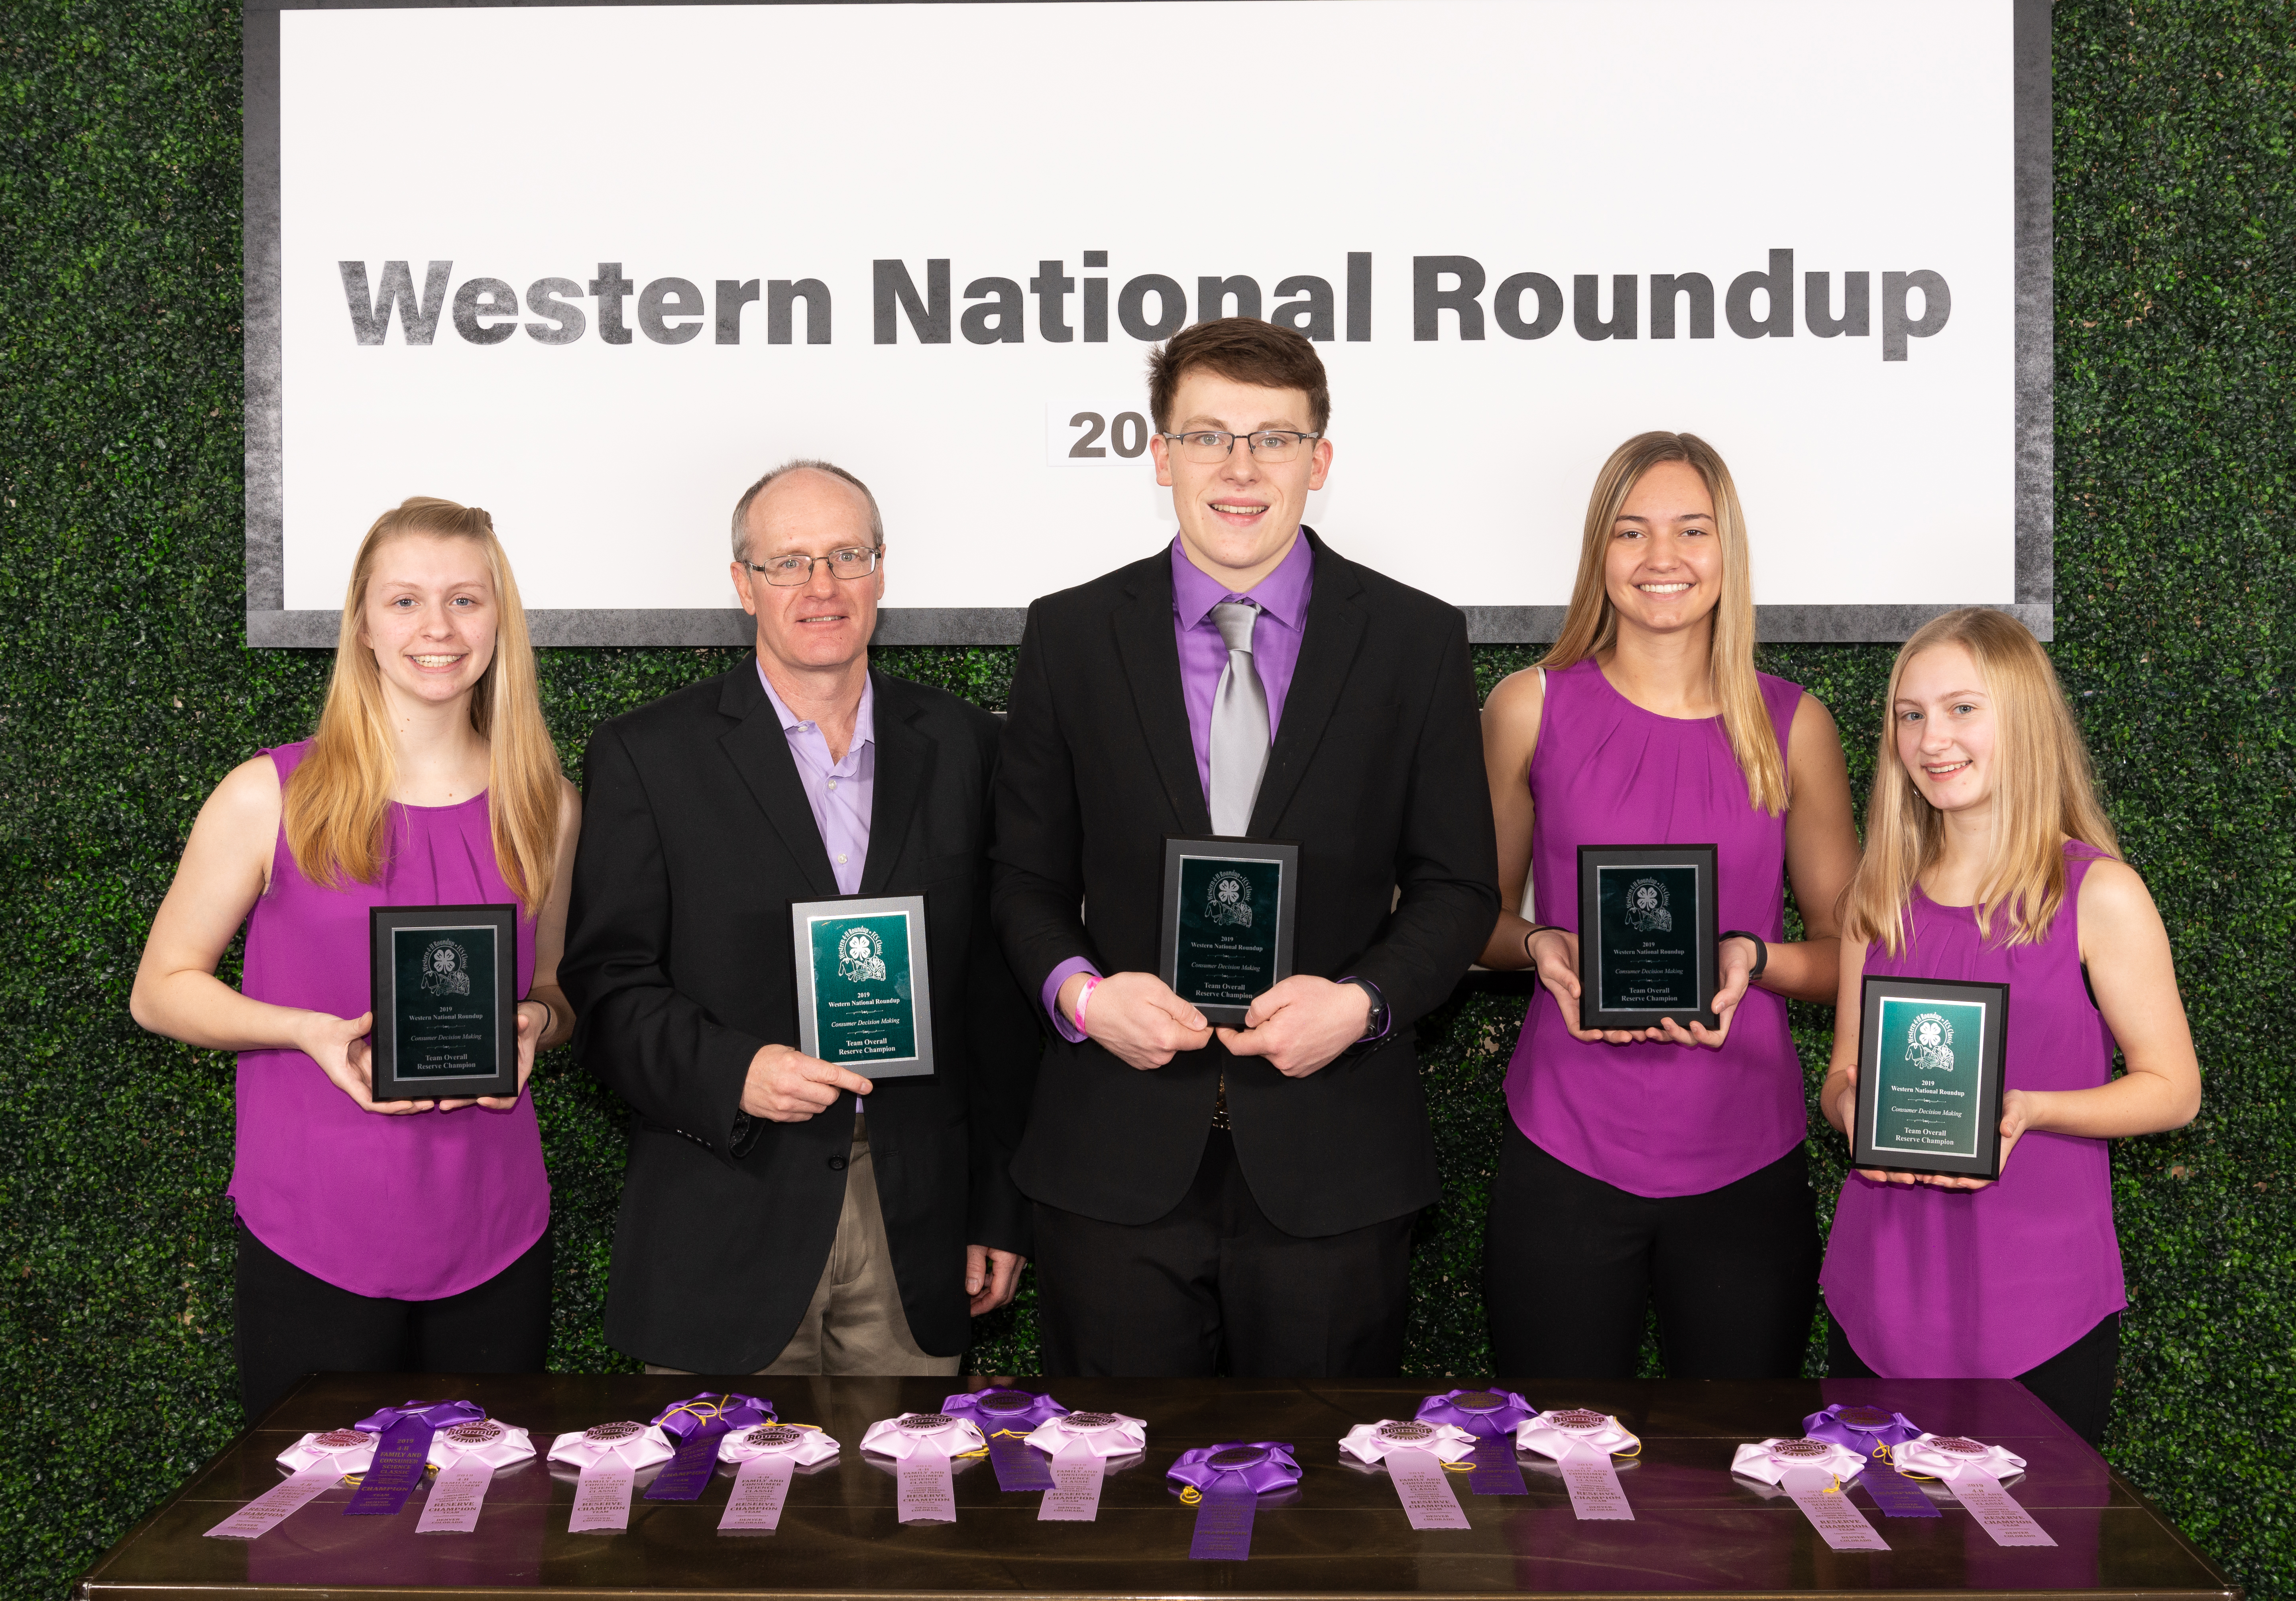 The Oliver County team placed second in consumer decision making at the Western National Roundup in Denver, Colo. Pictured are (from left) team member Morgyn Miller, coach Rick Schmidt, and team members Jacob Klaudt, Breanna Vosberg and Reanna Schmidt. (Photo courtesy of Western National Roundup)